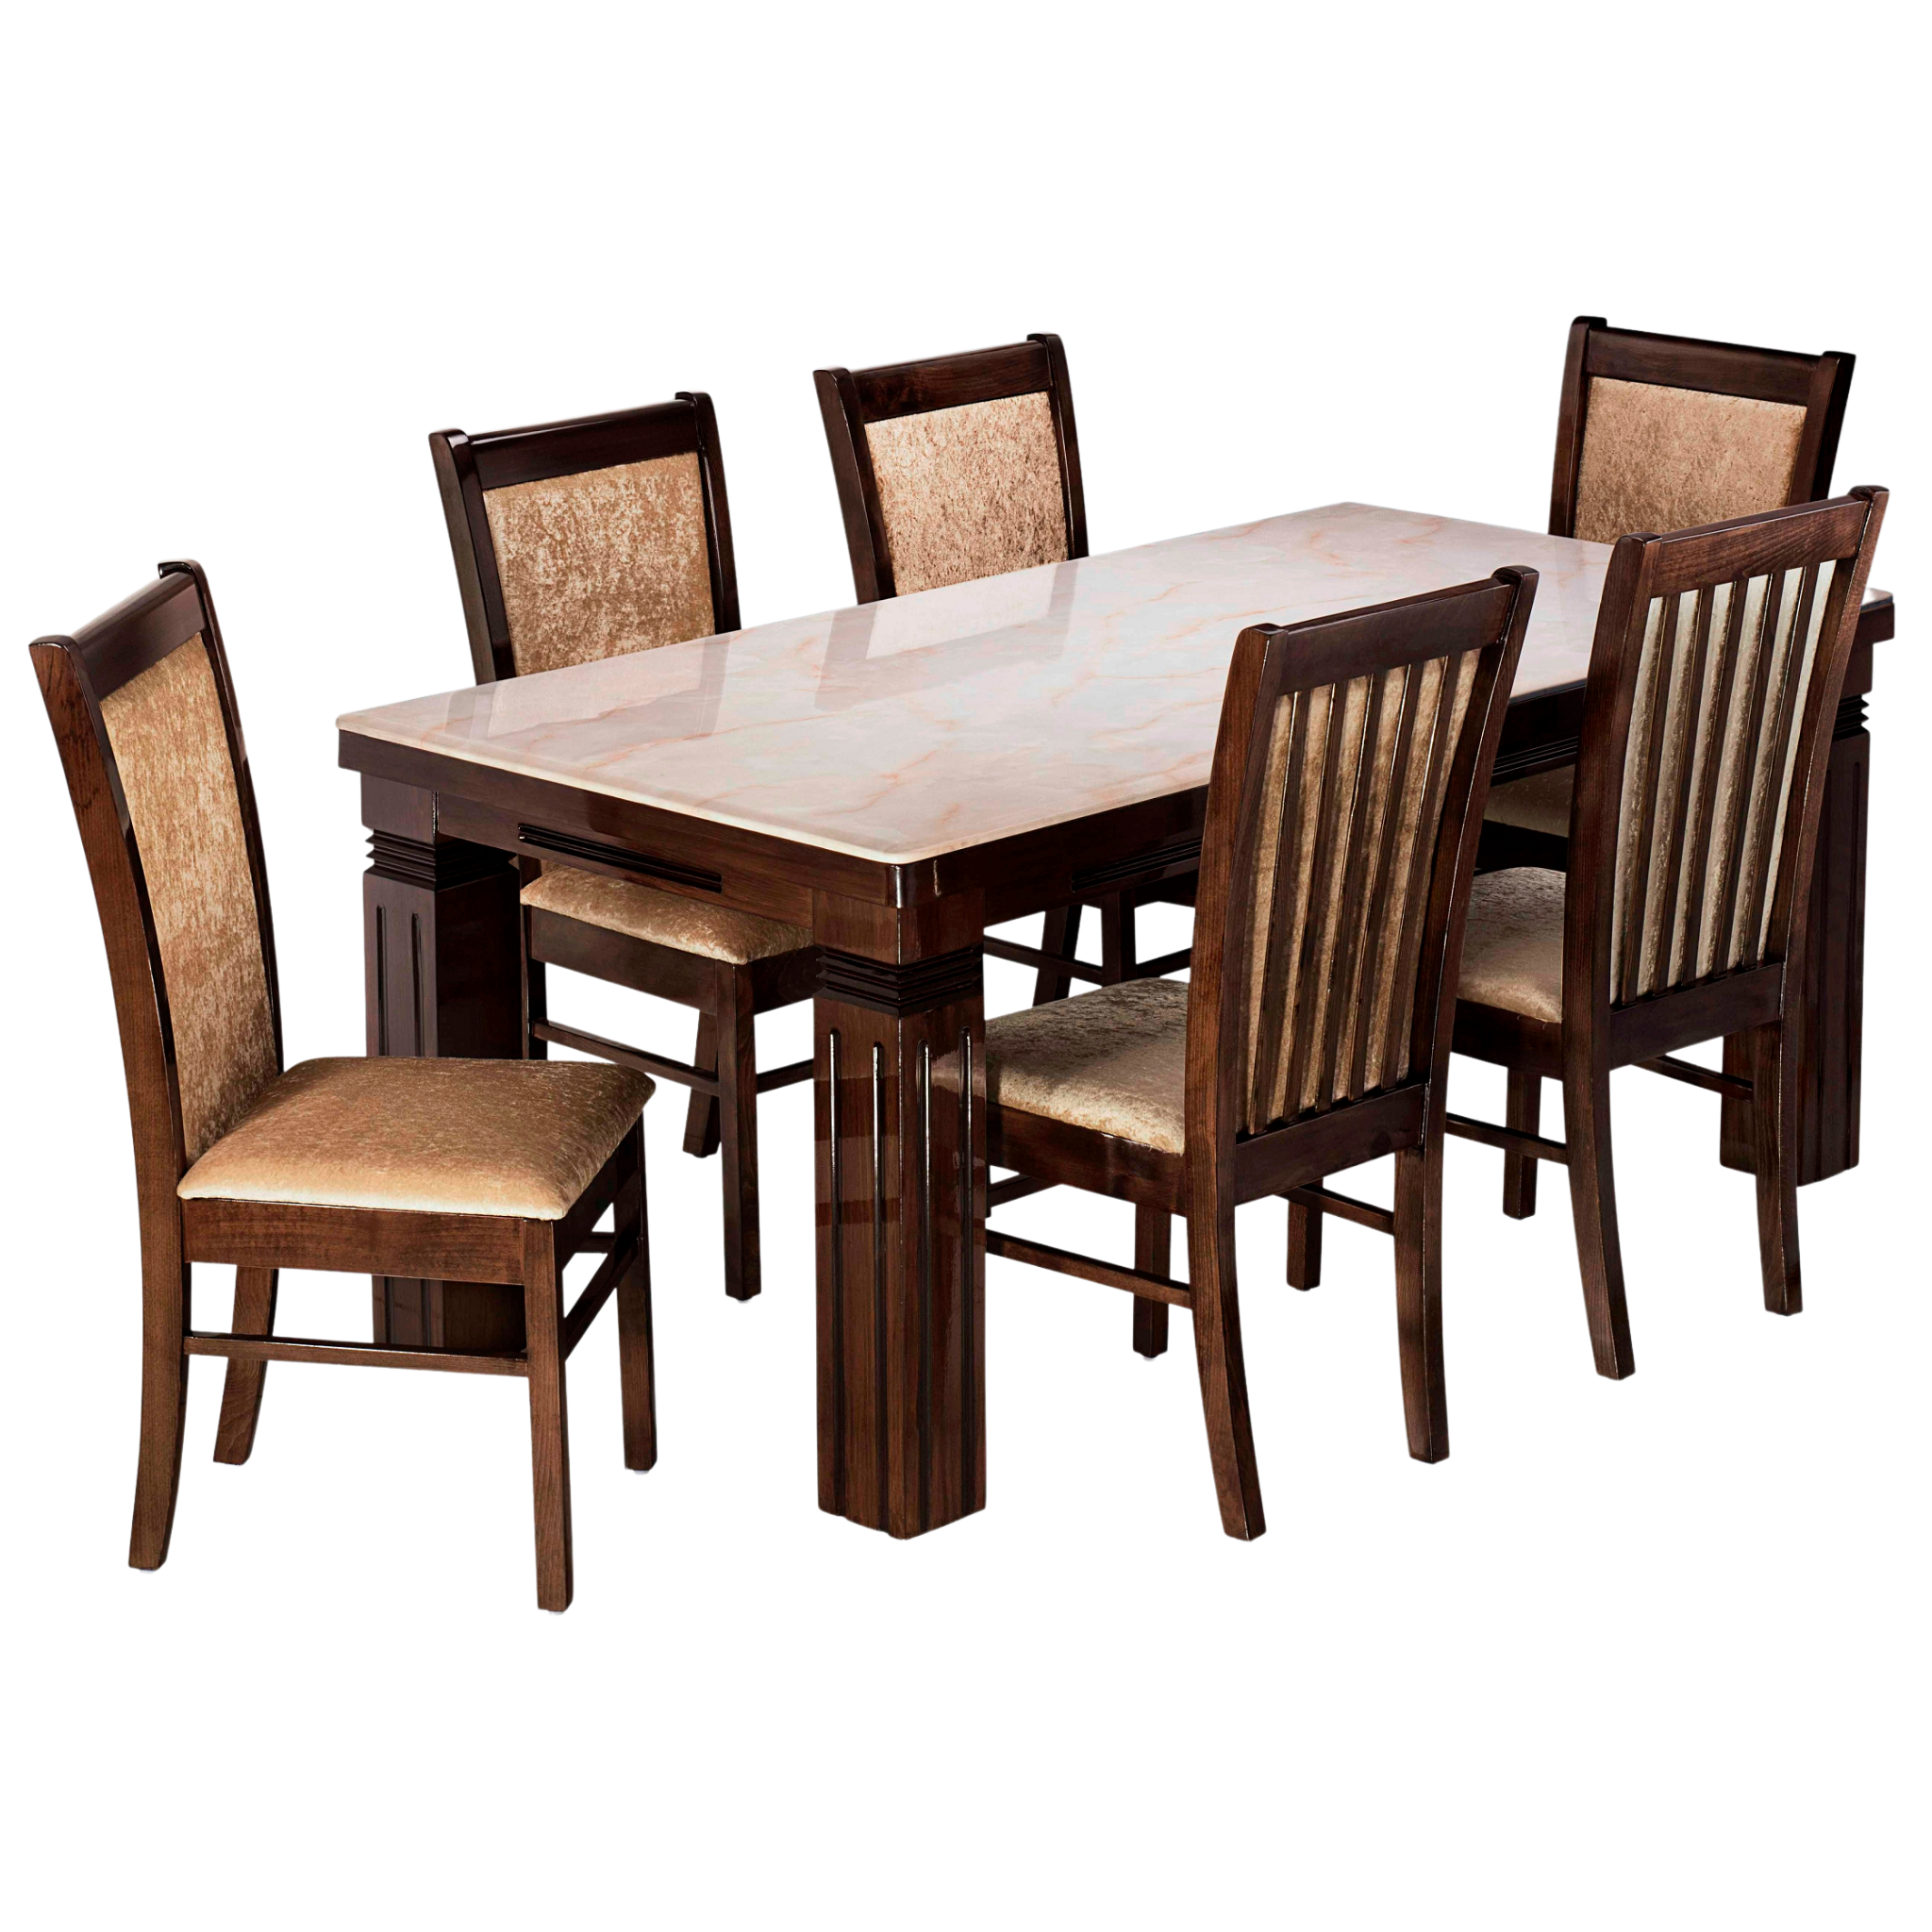 Hexa Dining Table with Chair